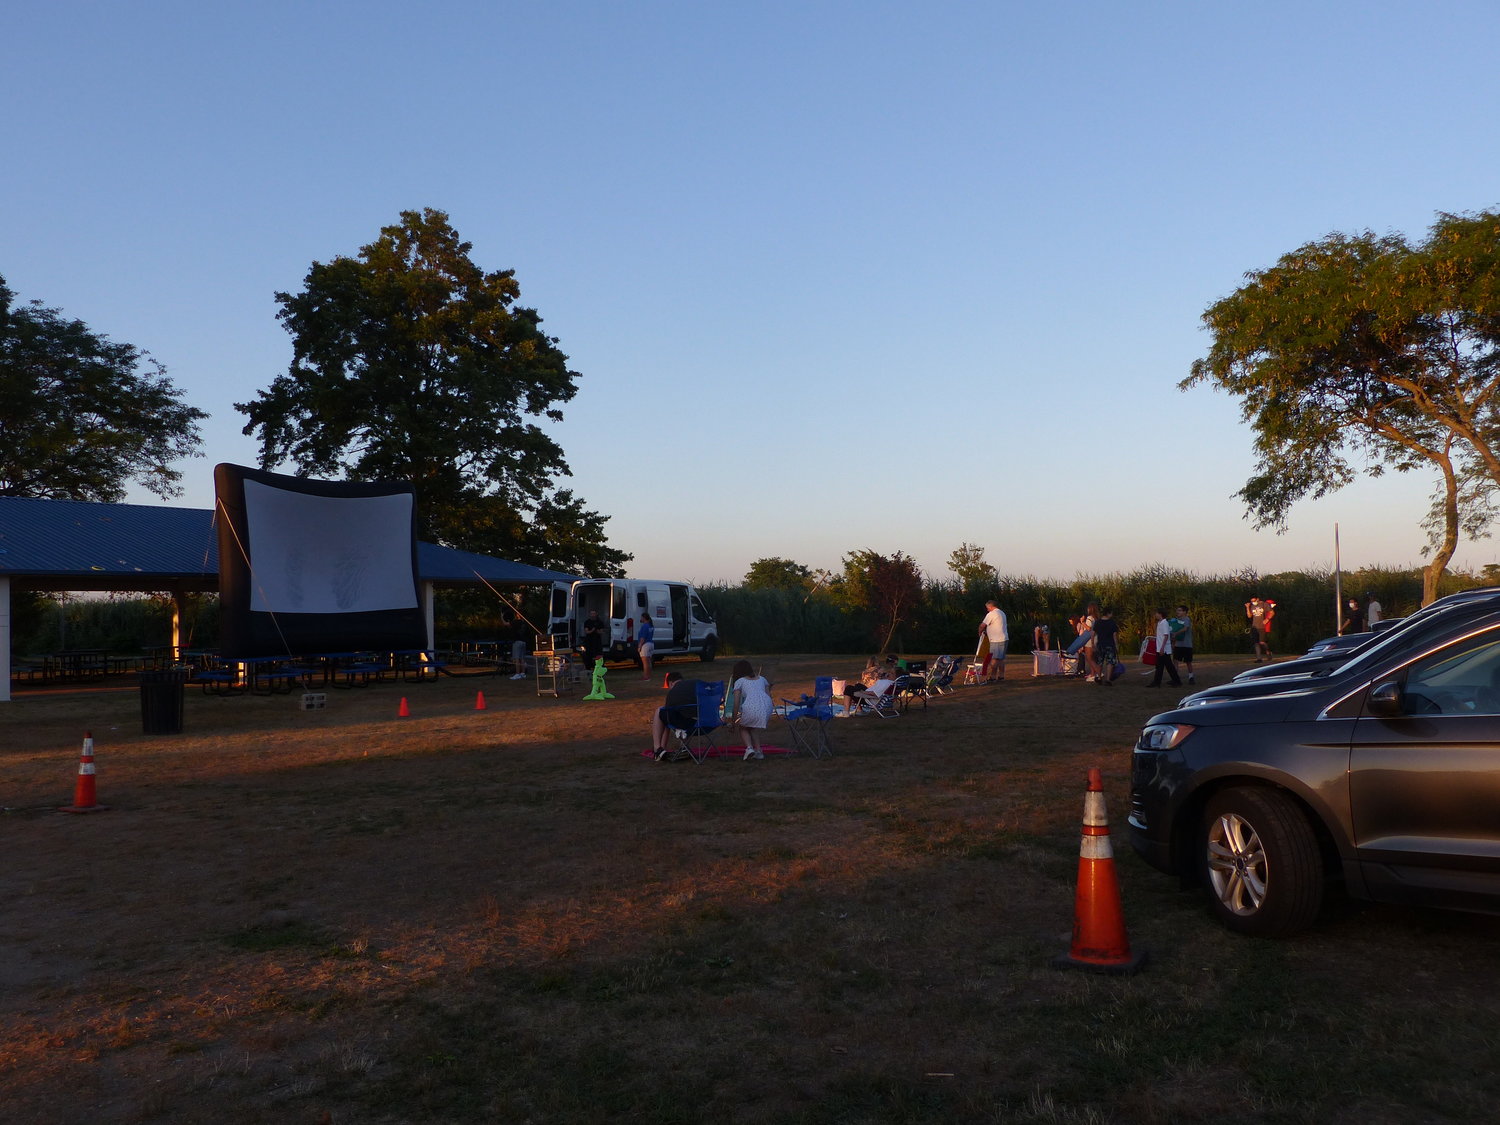 The Wantagh Chamber of Commerce will be hosting a drive-in movie at Wantagh Park every Wednesday in August, beginning with a sold-out crowd on August 3.